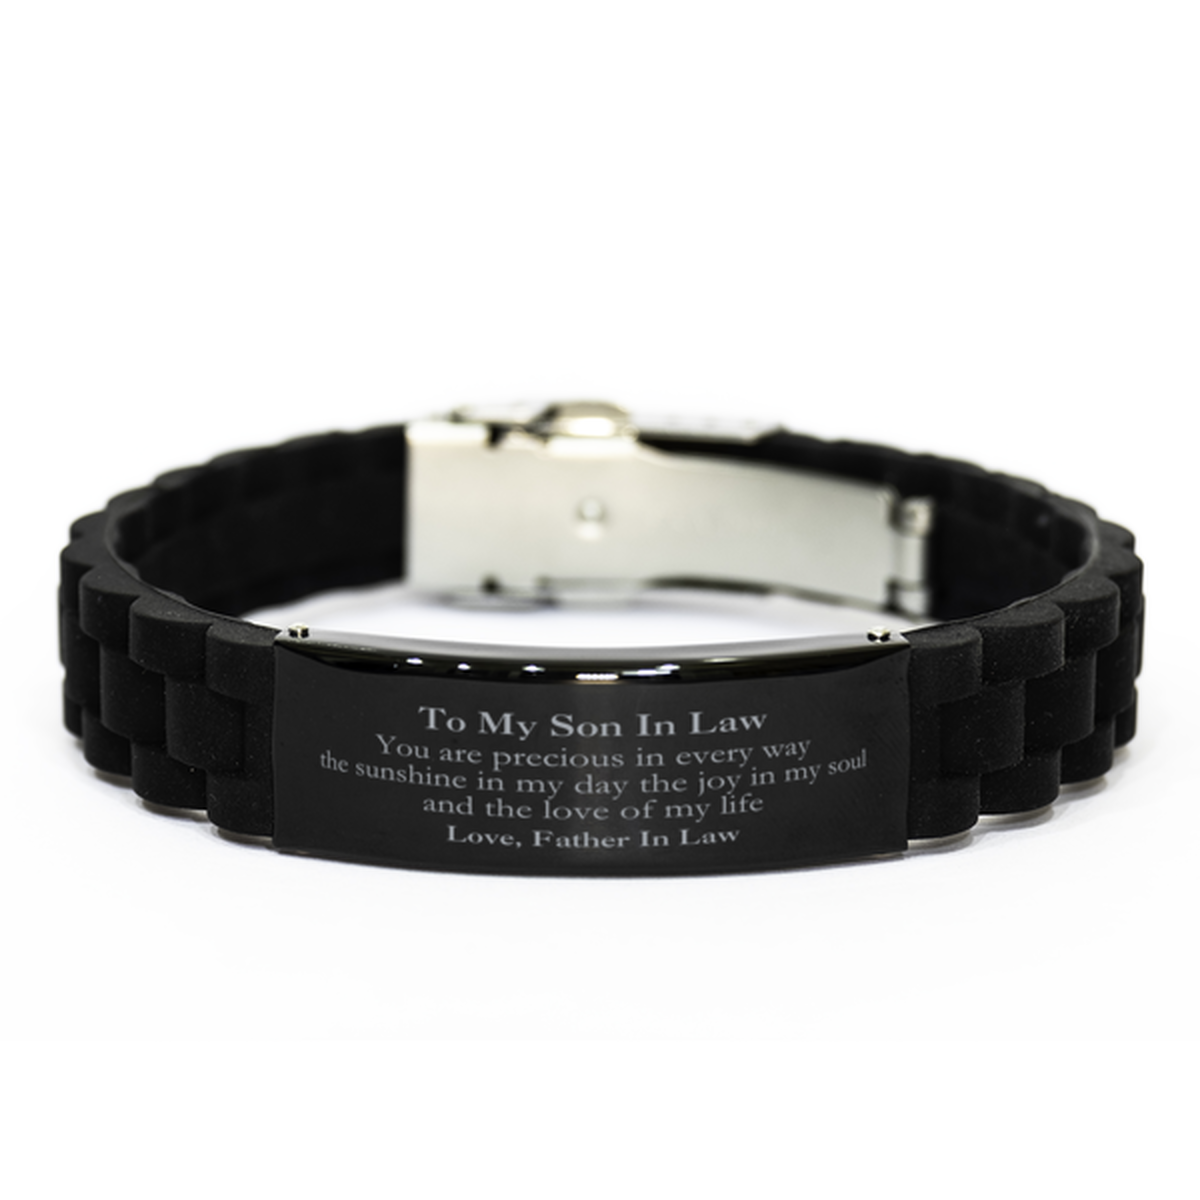 Graduation Gifts for Son In Law Black Glidelock Clasp Bracelet Present from Father In Law, Christmas Son In Law Birthday Gifts Son In Law You are precious in every way the sunshine in my day. Love, Father In Law